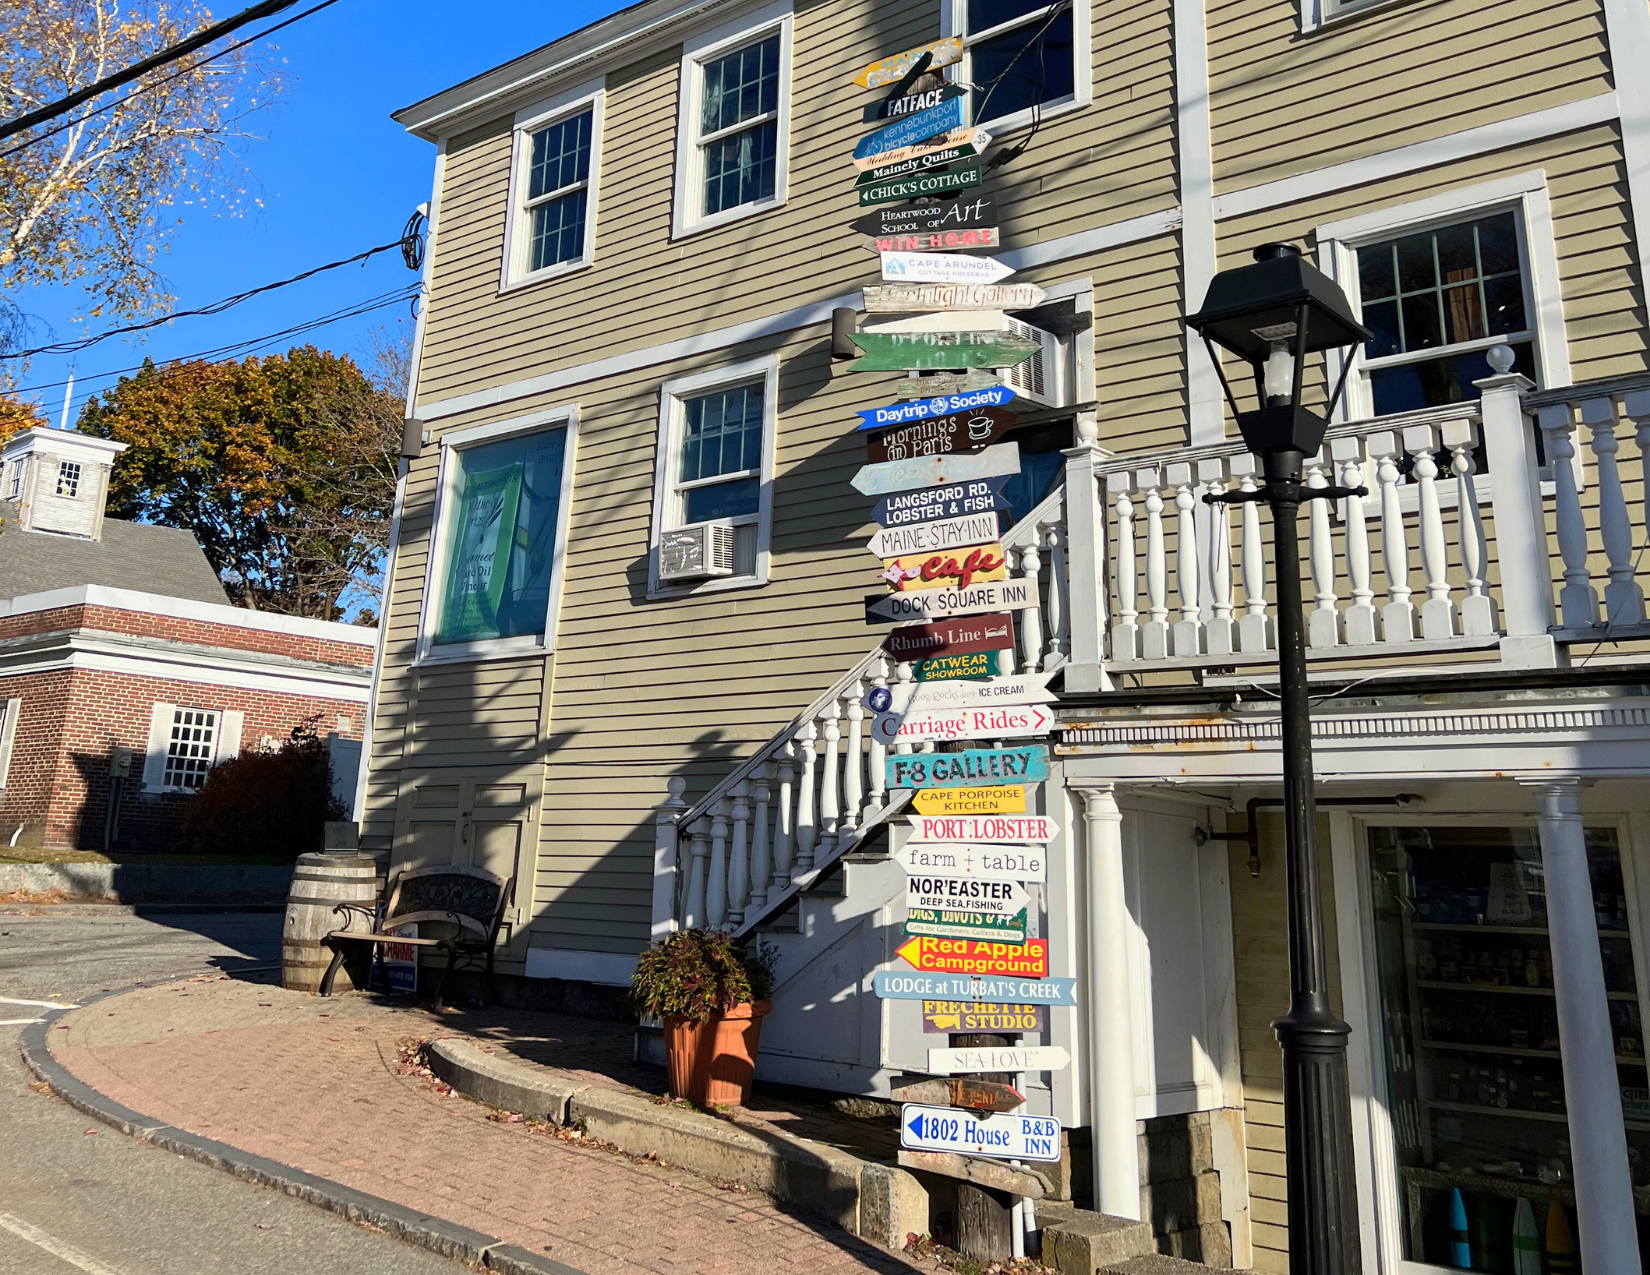 Colorful directional street signs on arrows in Kennebunkport, Maine